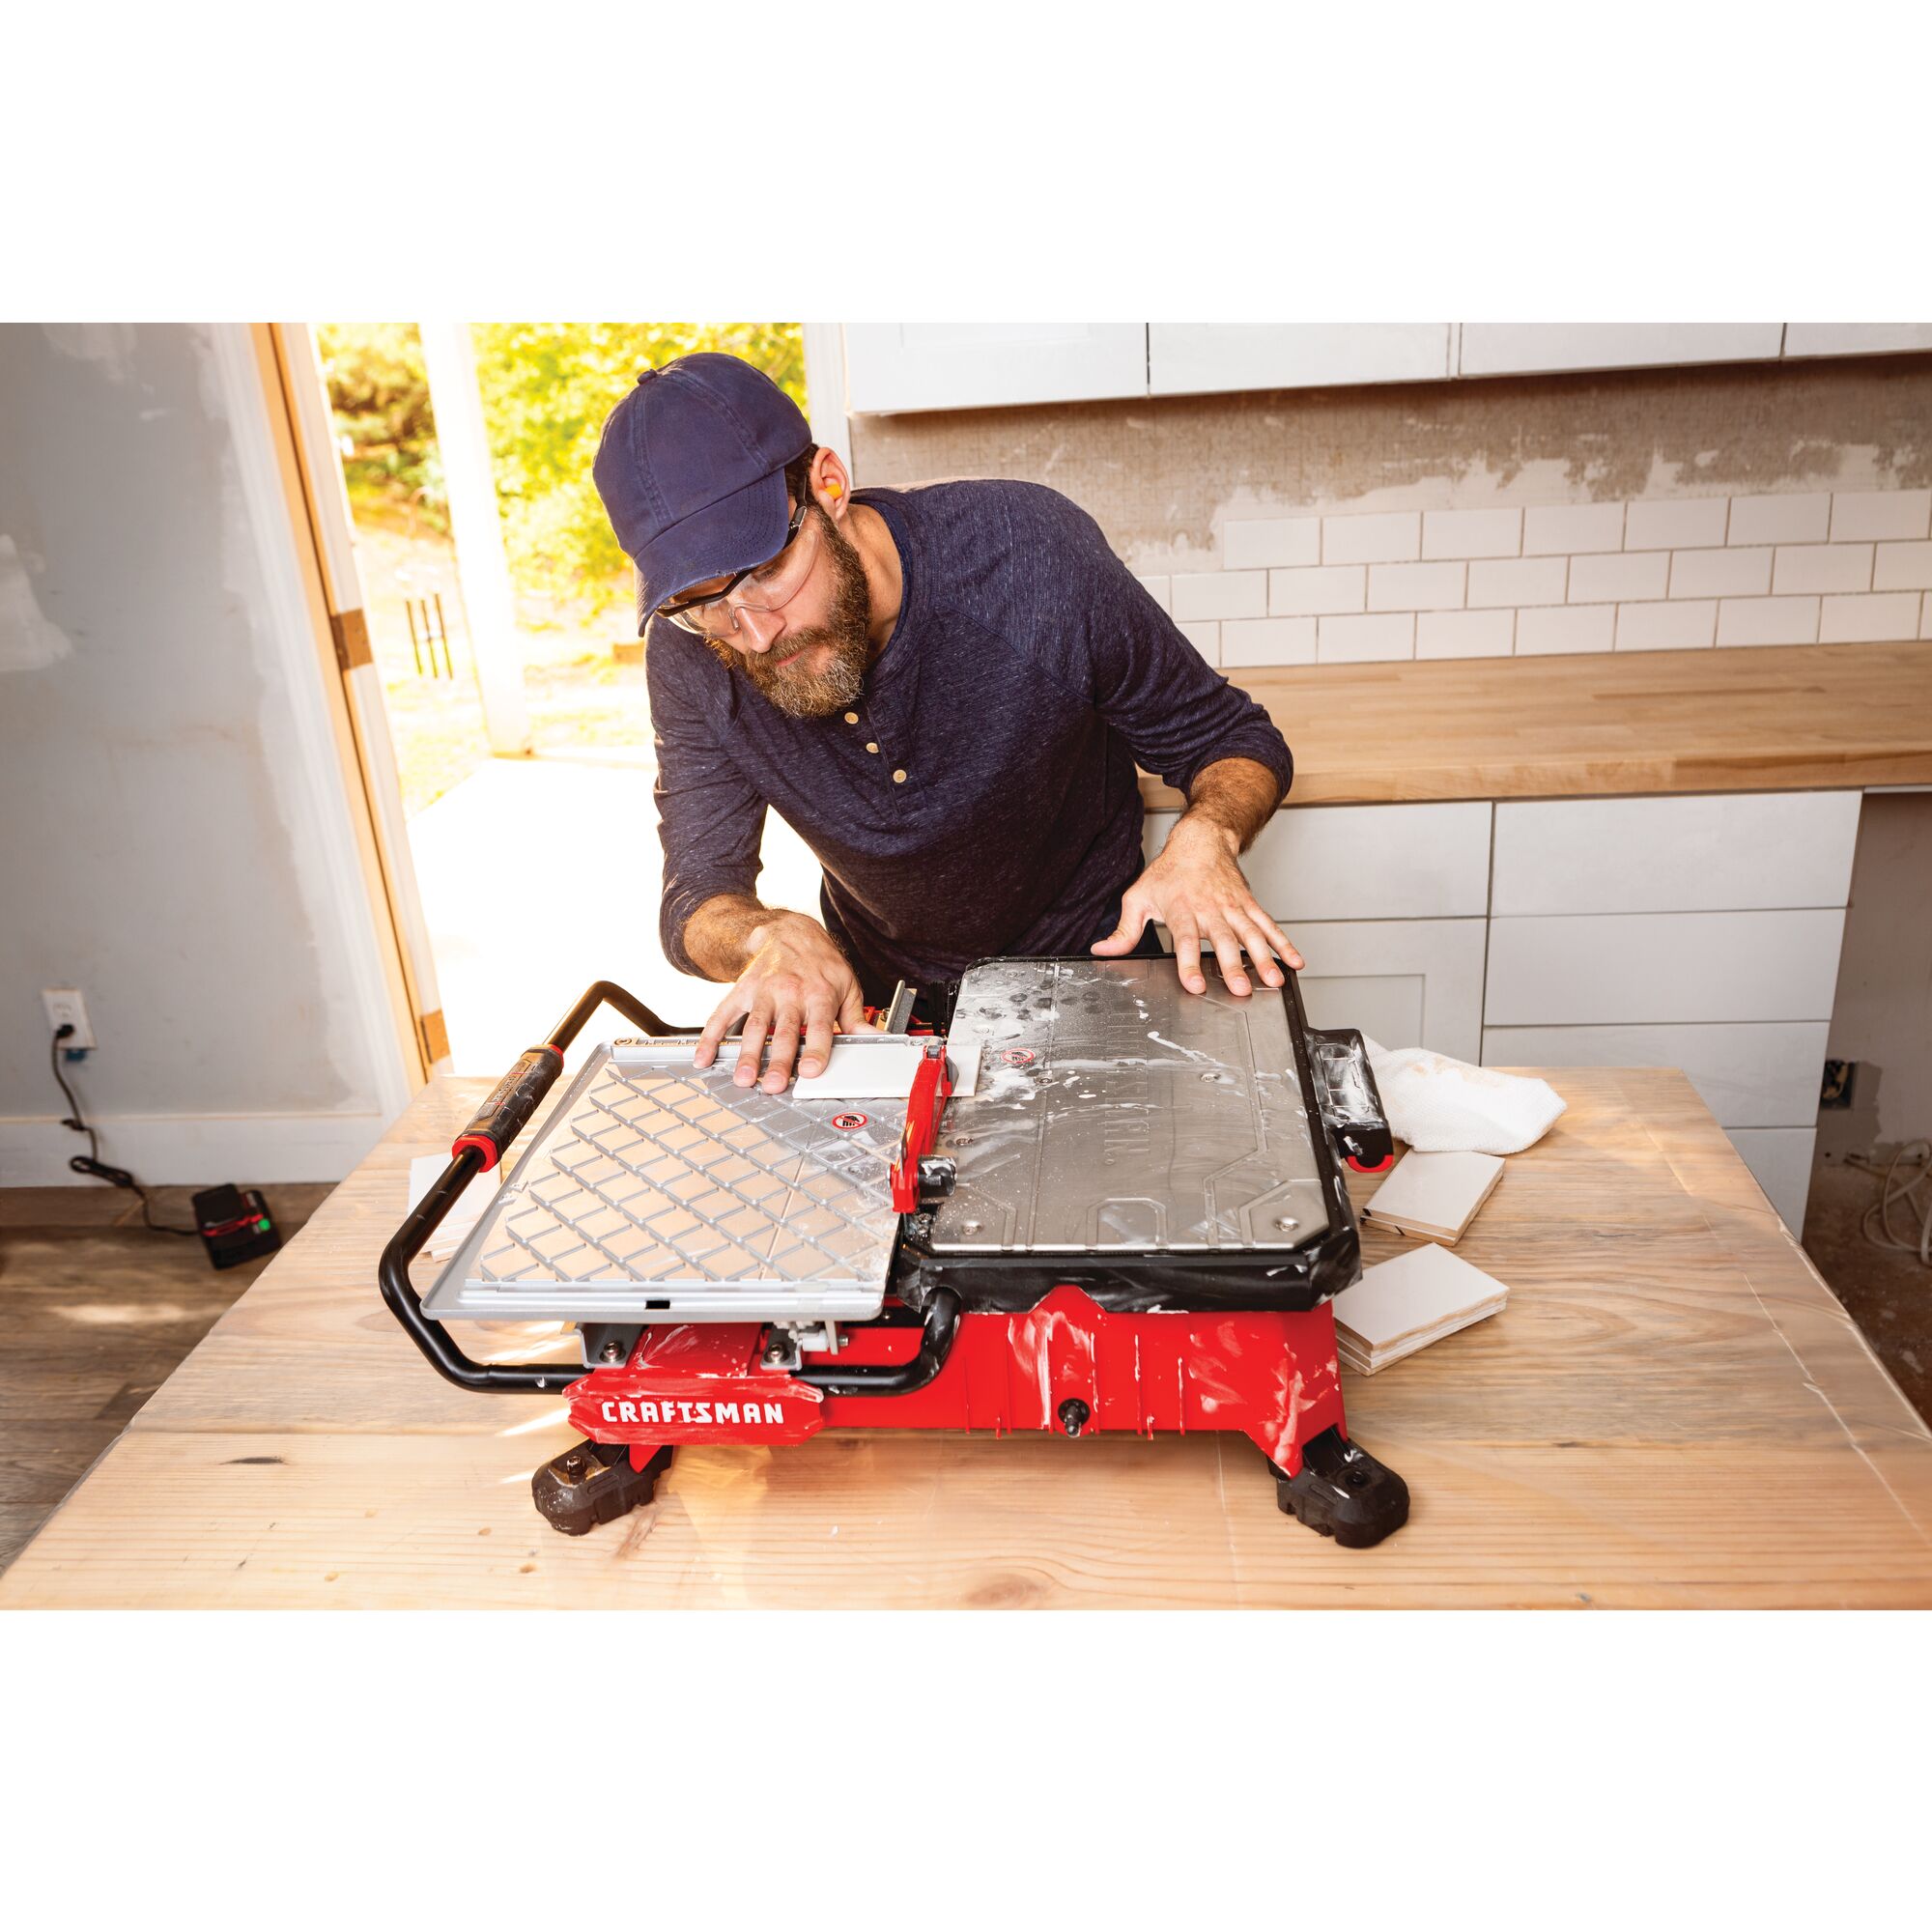 20 volt 7 inch cordless compact wet tile saw being used by a person to cut a tile indoors.